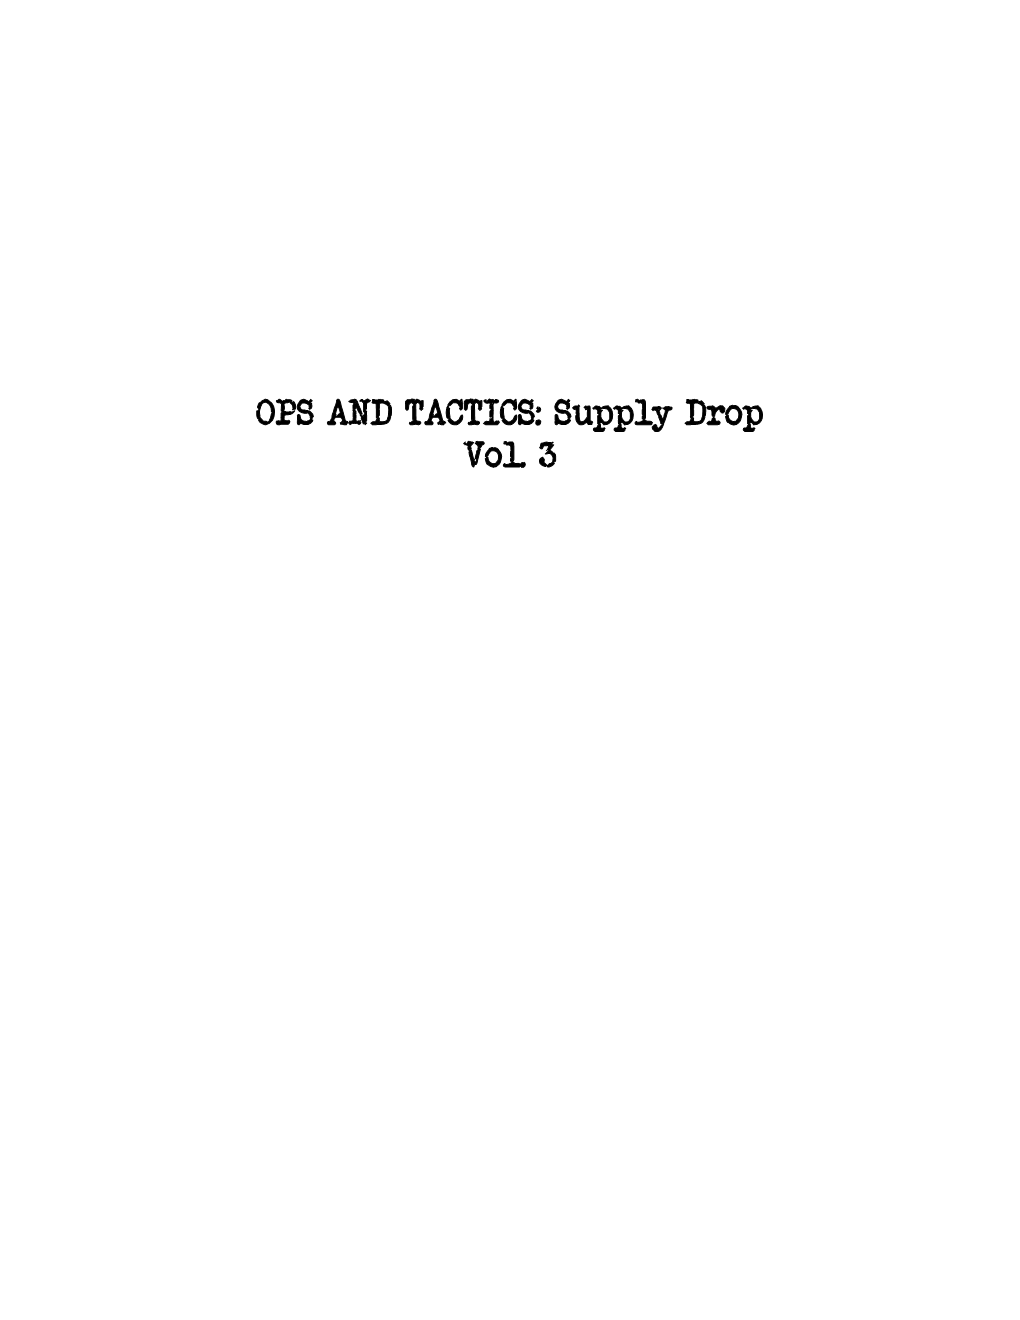 OPS and TACTICS: Supply Drop Vol. 3 How to Use This Book This Book Is a Supplement to the Ops and Tactics RPG System